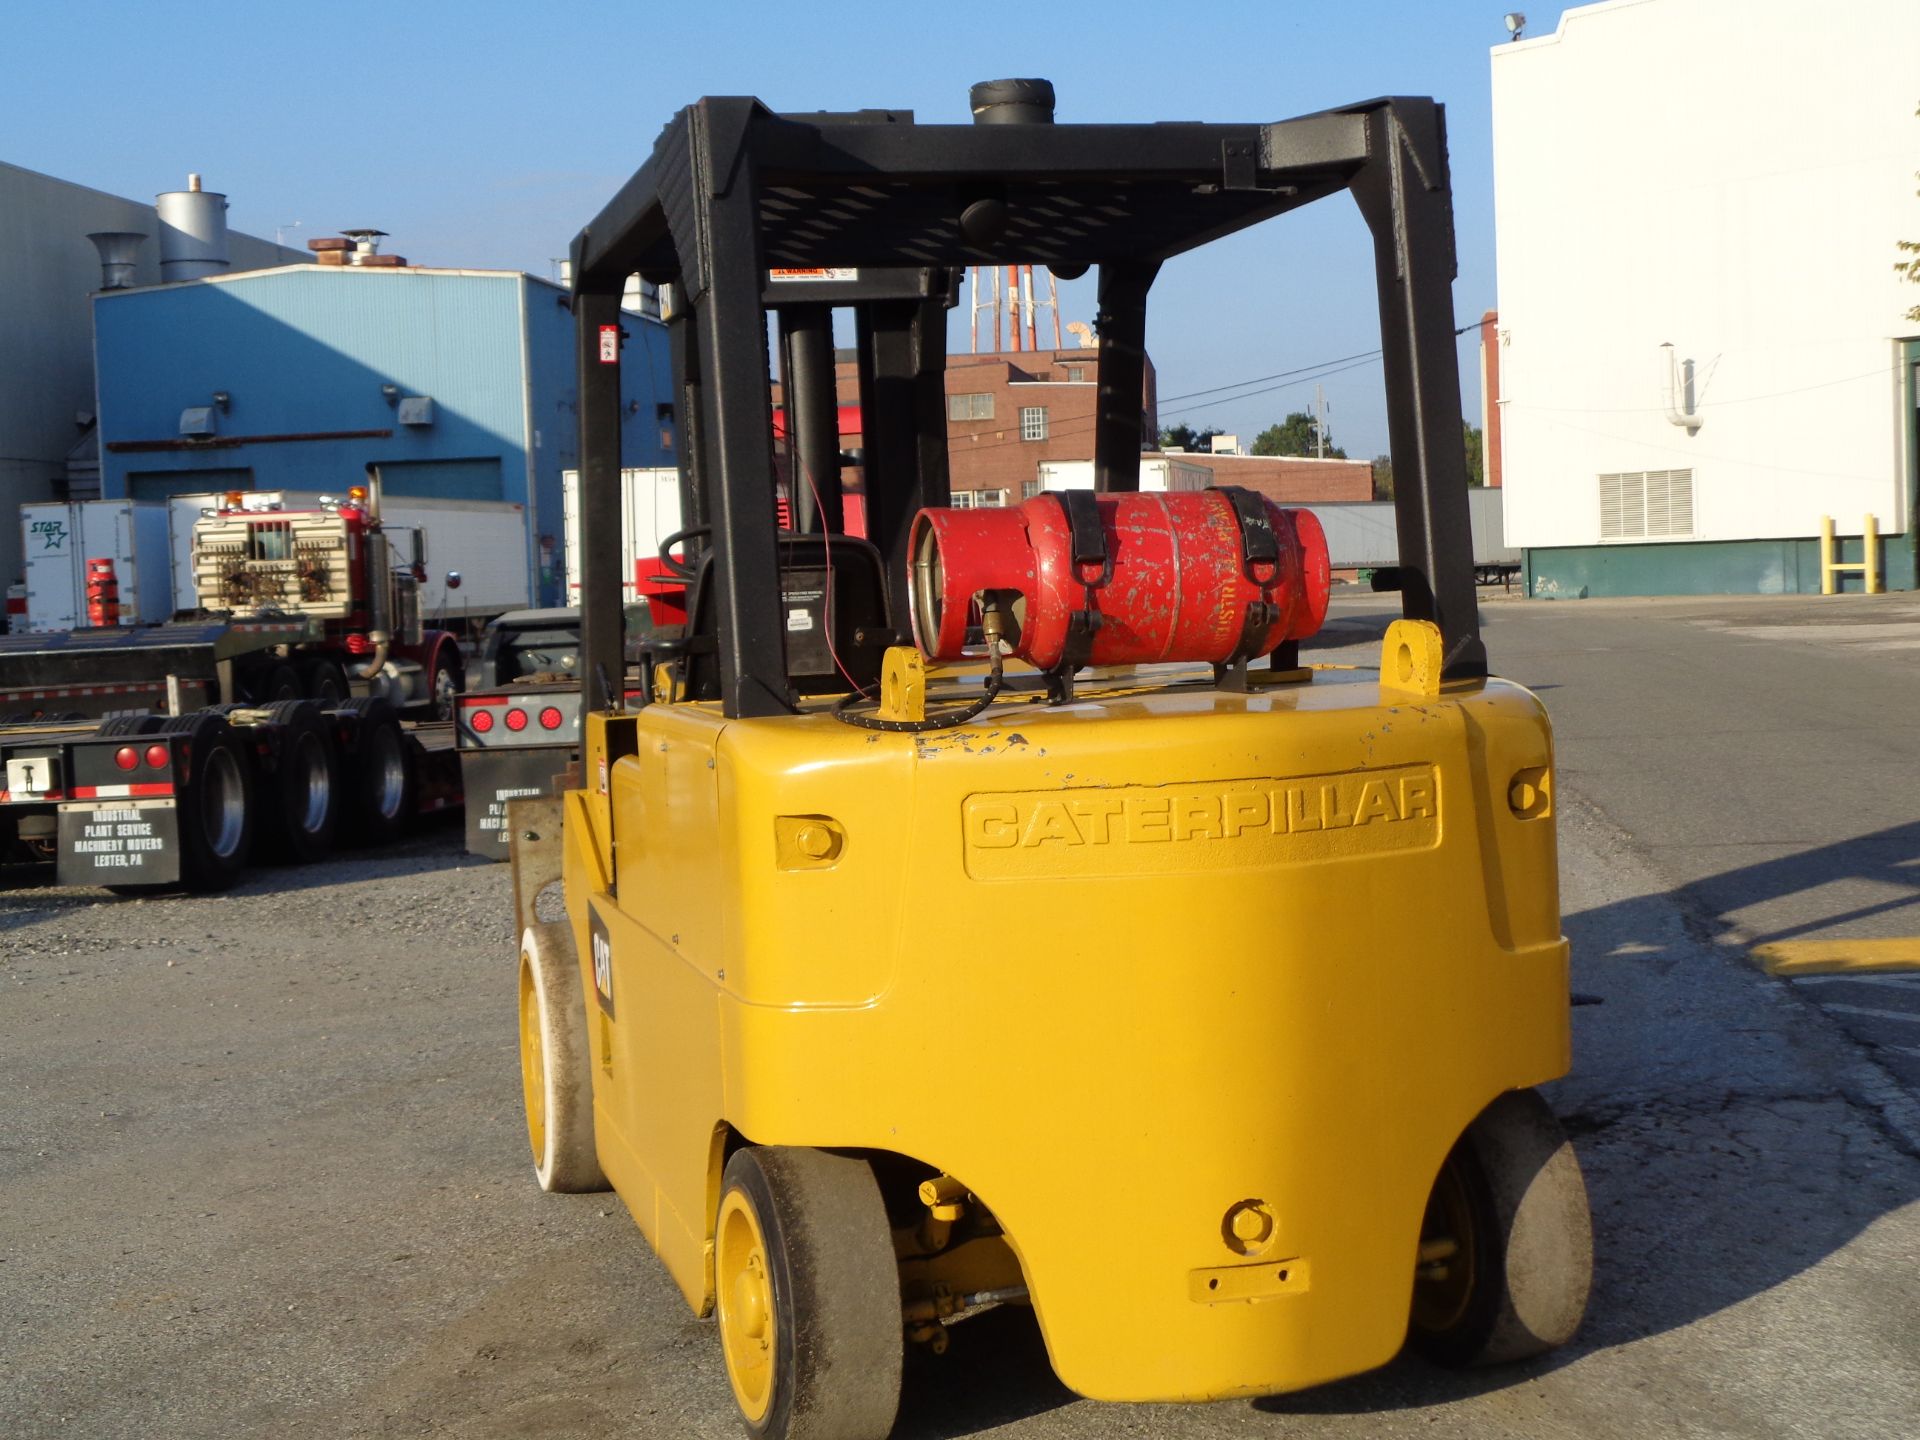 Caterpillar T200 20,000 lbs Cushion Tire Forklift - Image 5 of 11